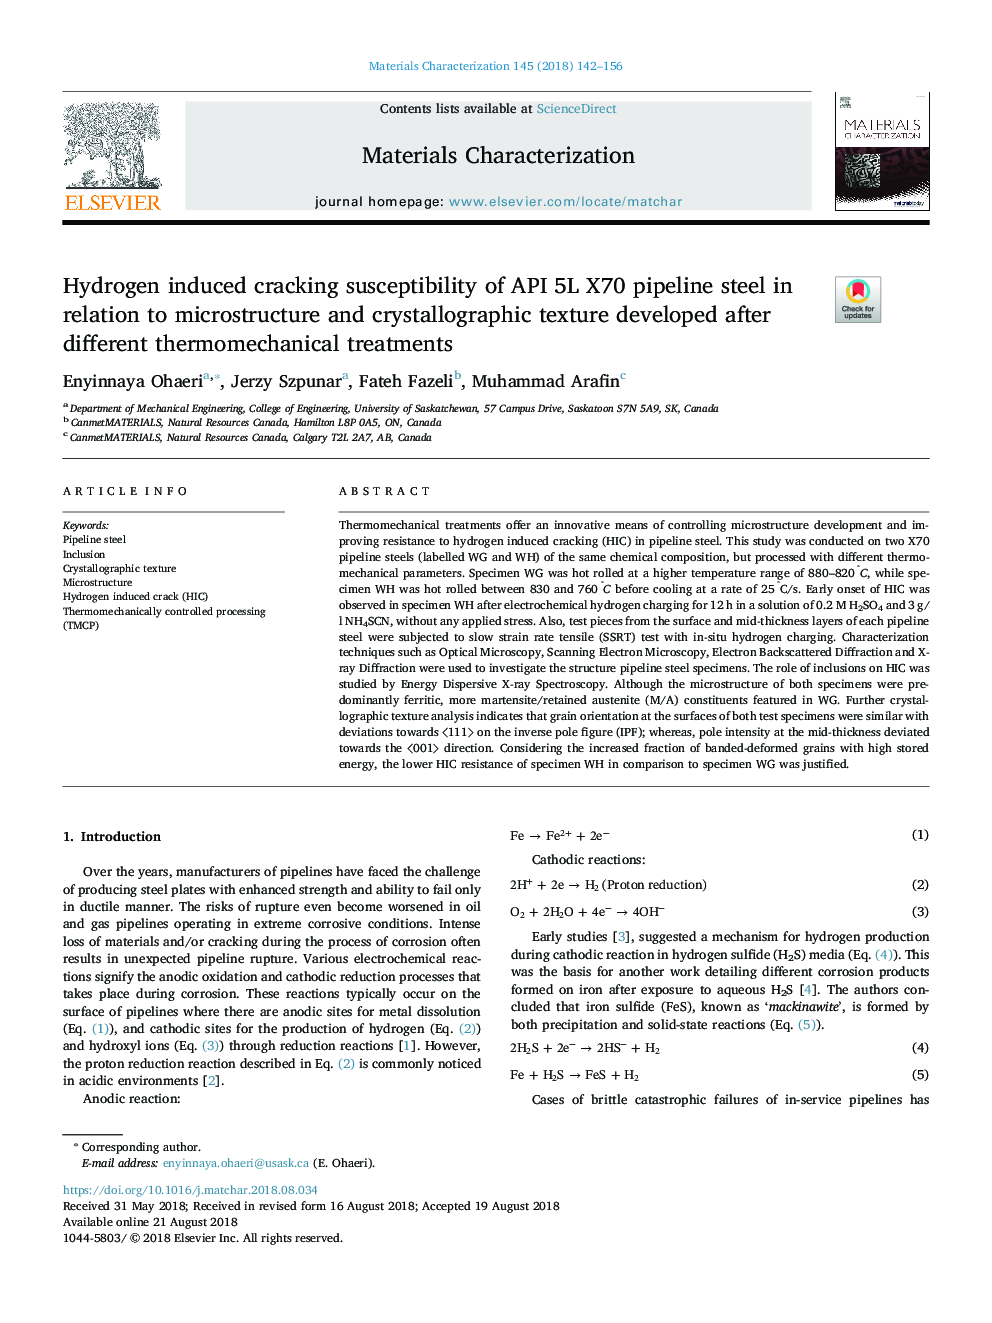 Hydrogen induced cracking susceptibility of API 5L X70 pipeline steel in relation to microstructure and crystallographic texture developed after different thermomechanical treatments